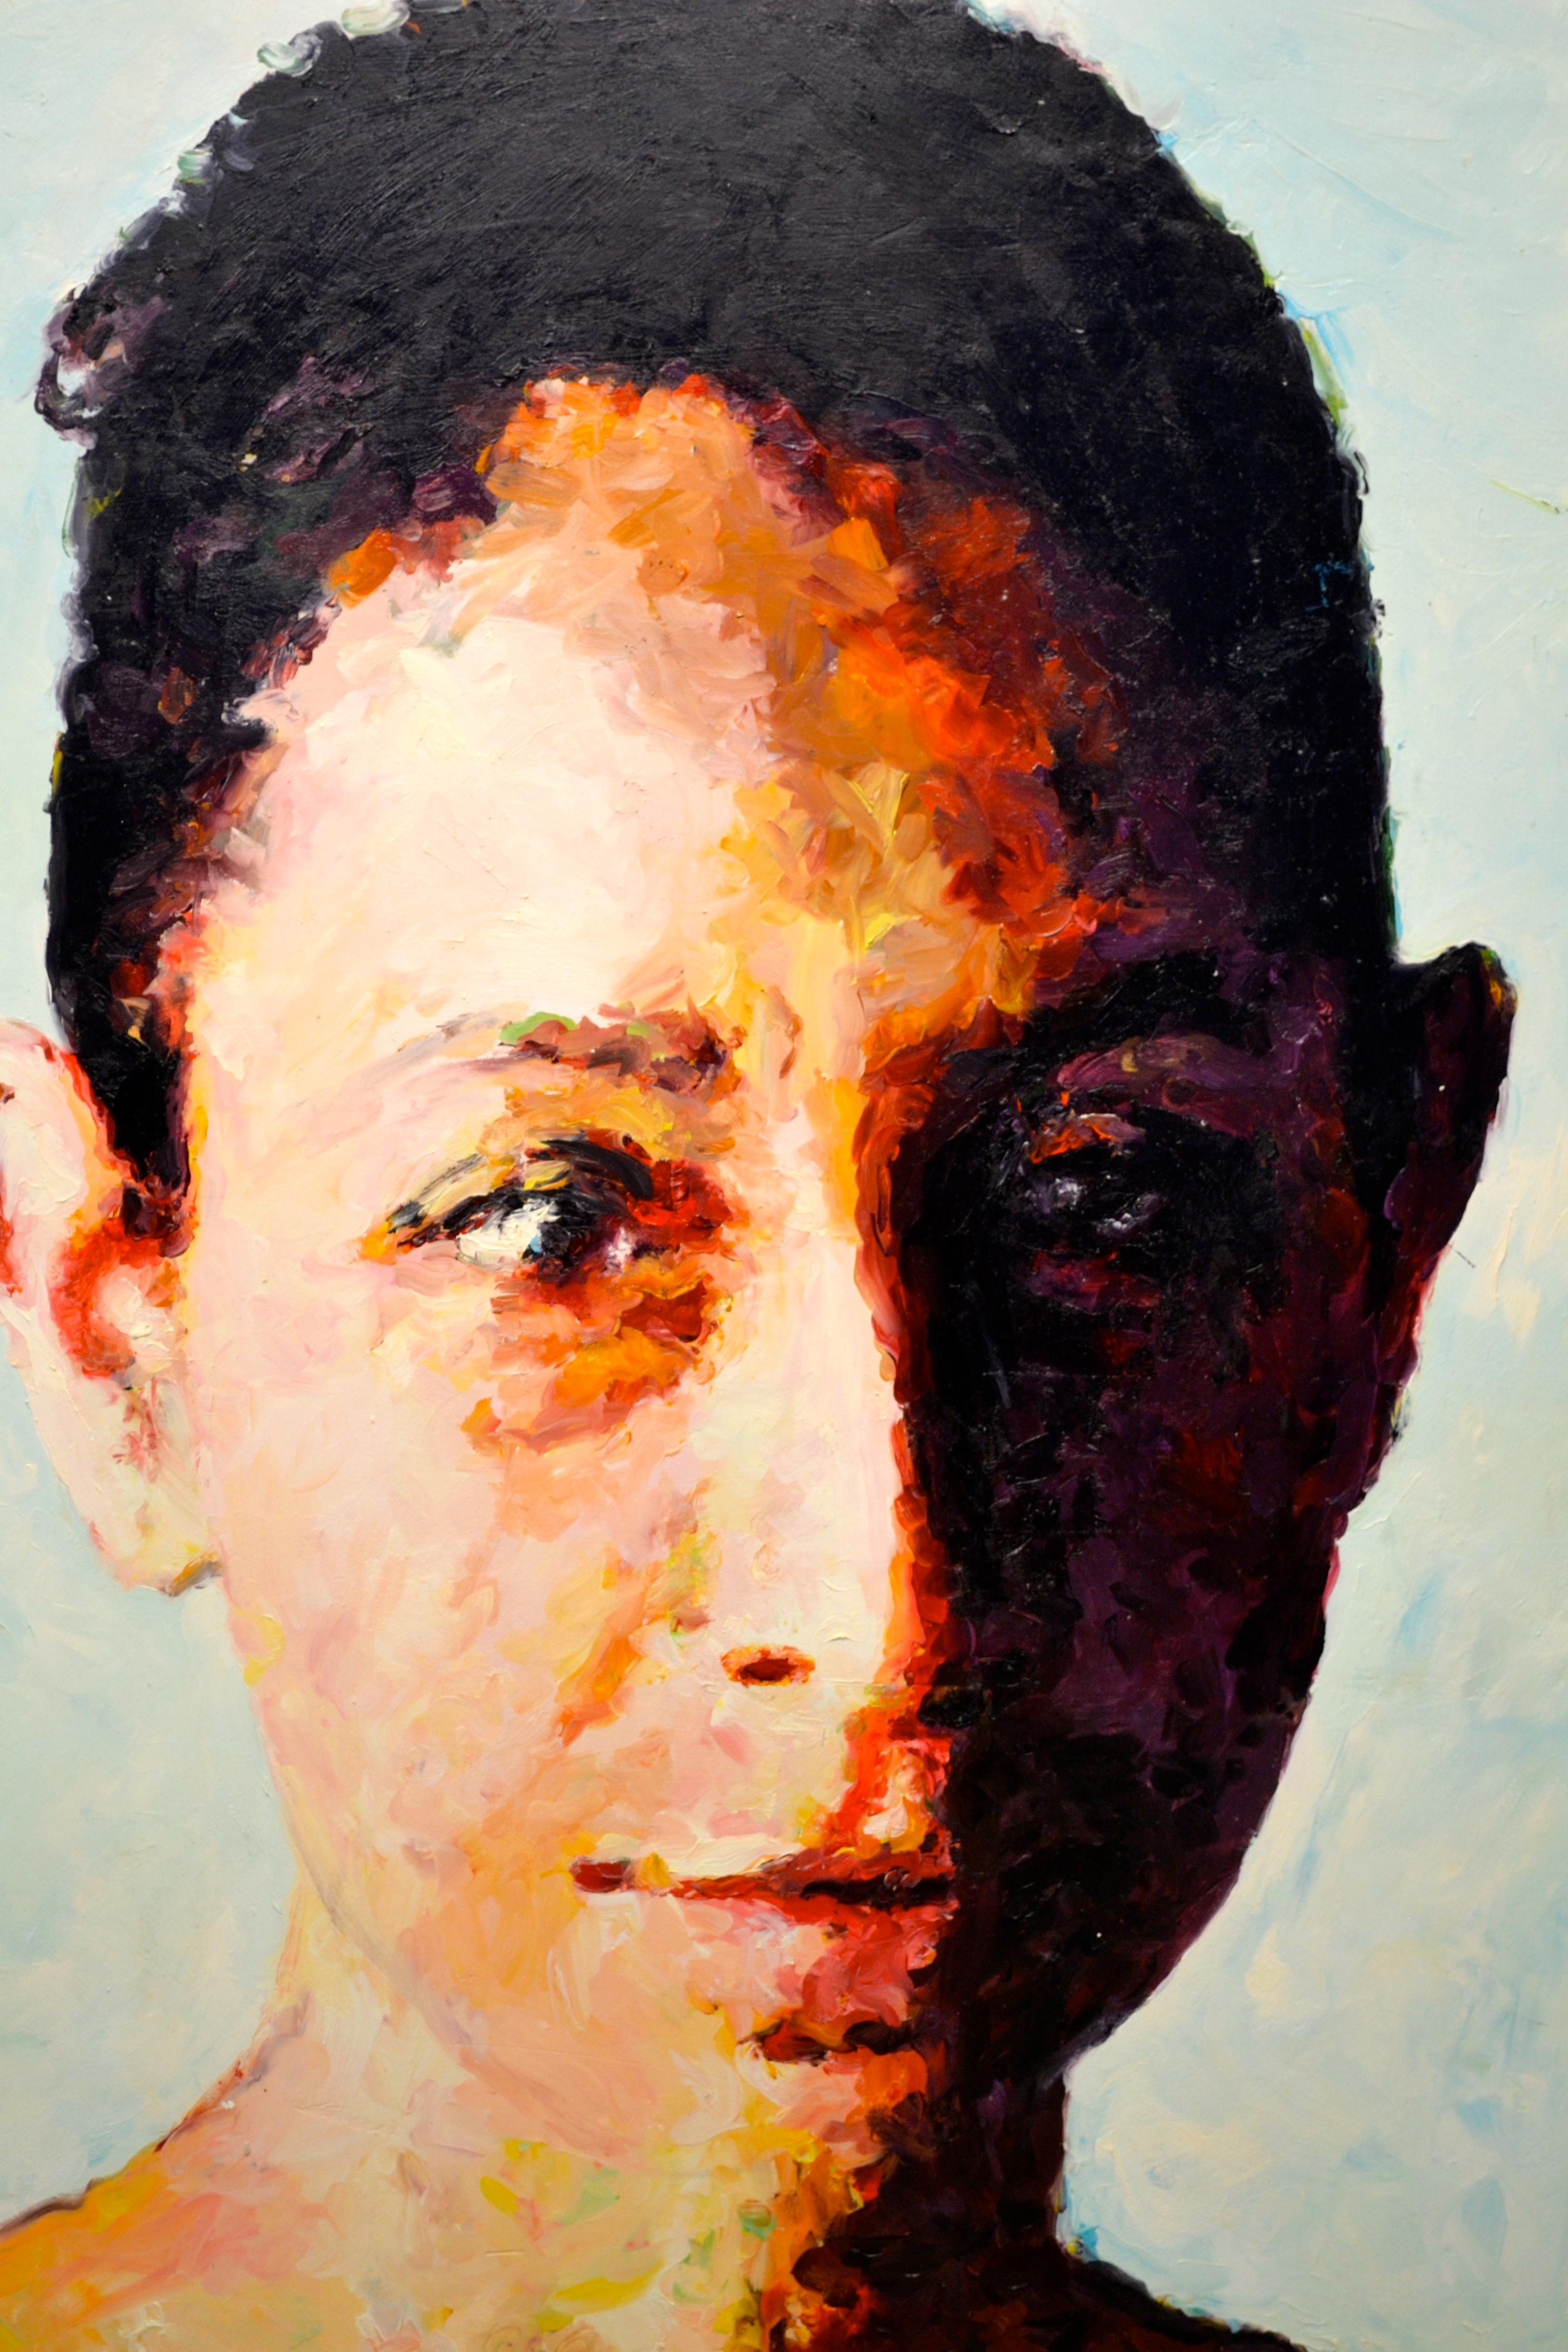 Portrait of a woman with her face split between shadow and light titled Chilanga #1 done in encaustic and mixed media on canvas laid down on board. Signed and dated 07. Titled on a verso sticker

Mark Gaskin is a Postmodern painter born in 1956 in